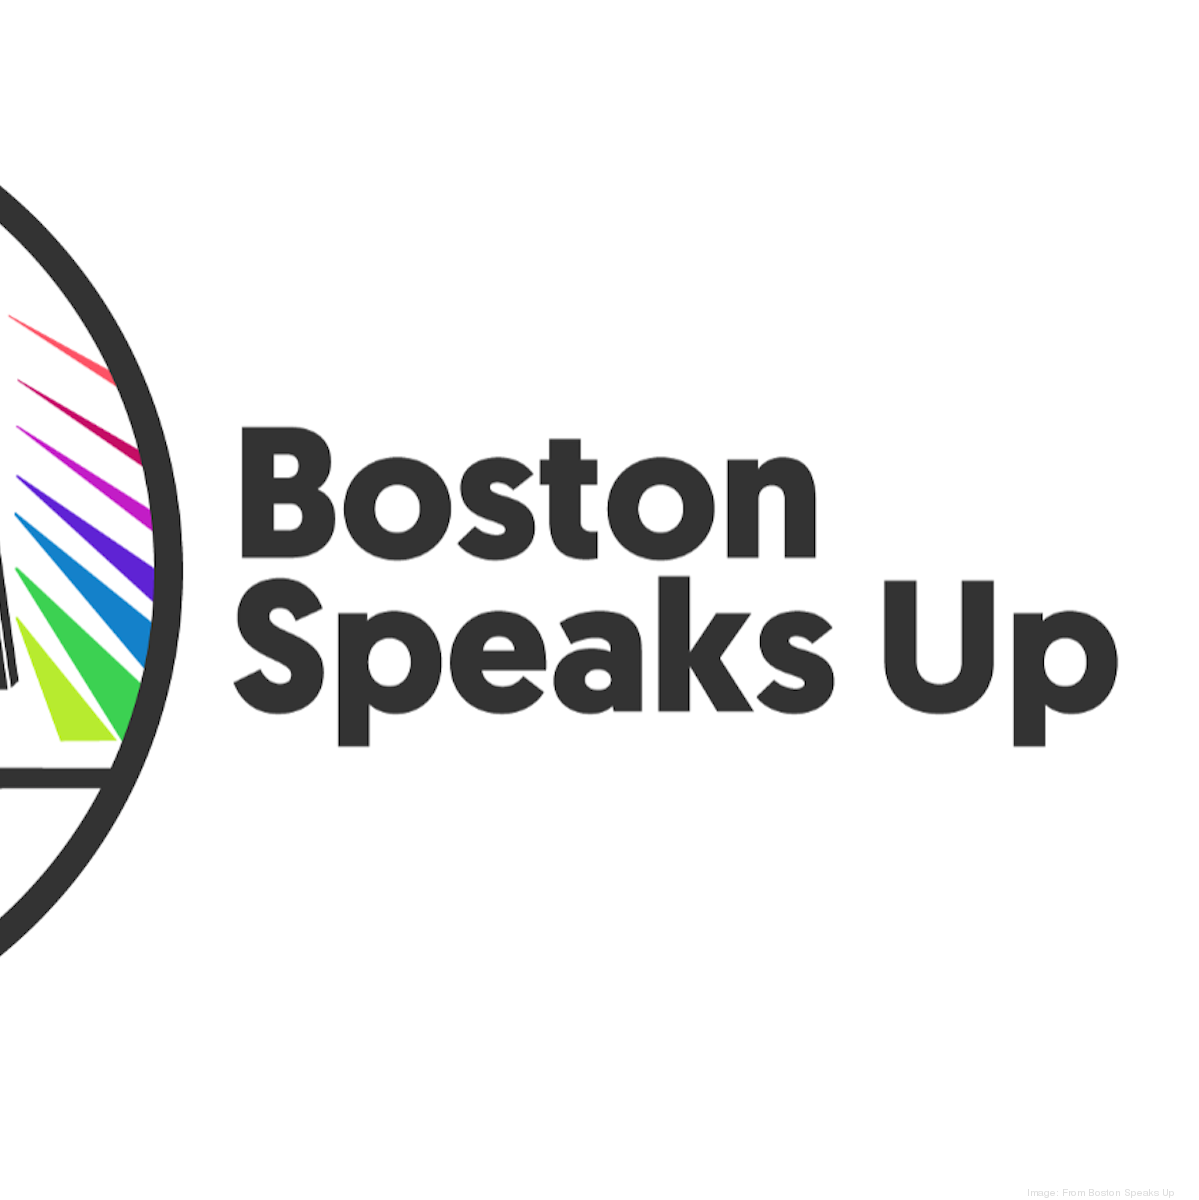 Boston Speaks Up Startups, Tech News and Events Boston Speaks Up Inno